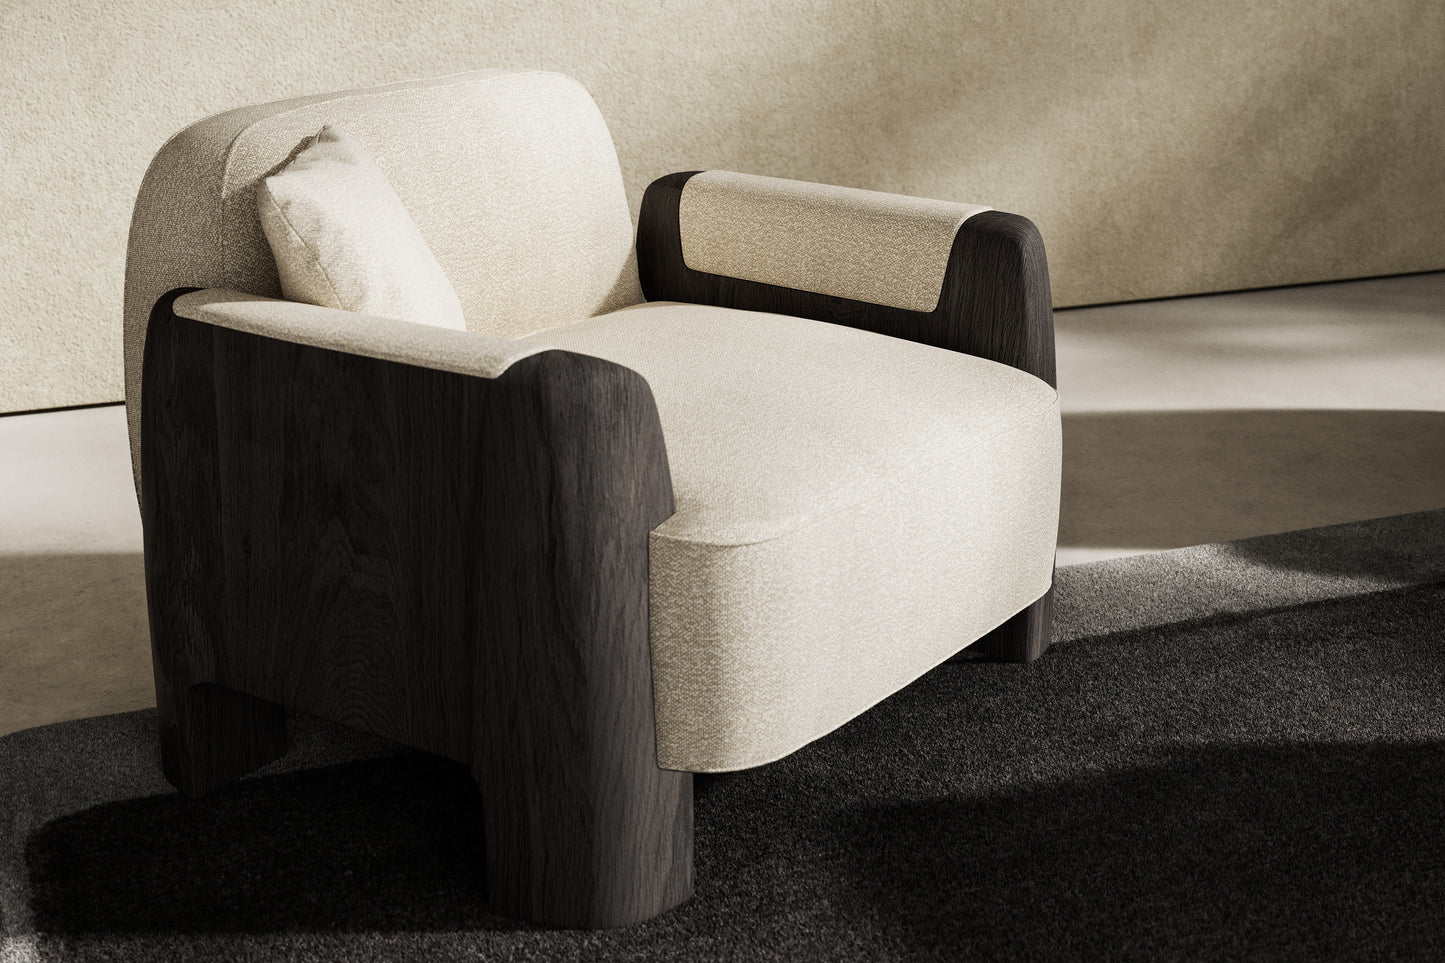 BARATTI LOUNGE CHAIR | COLLECTION PIETRA CASA | QUOTE BY REQUEST